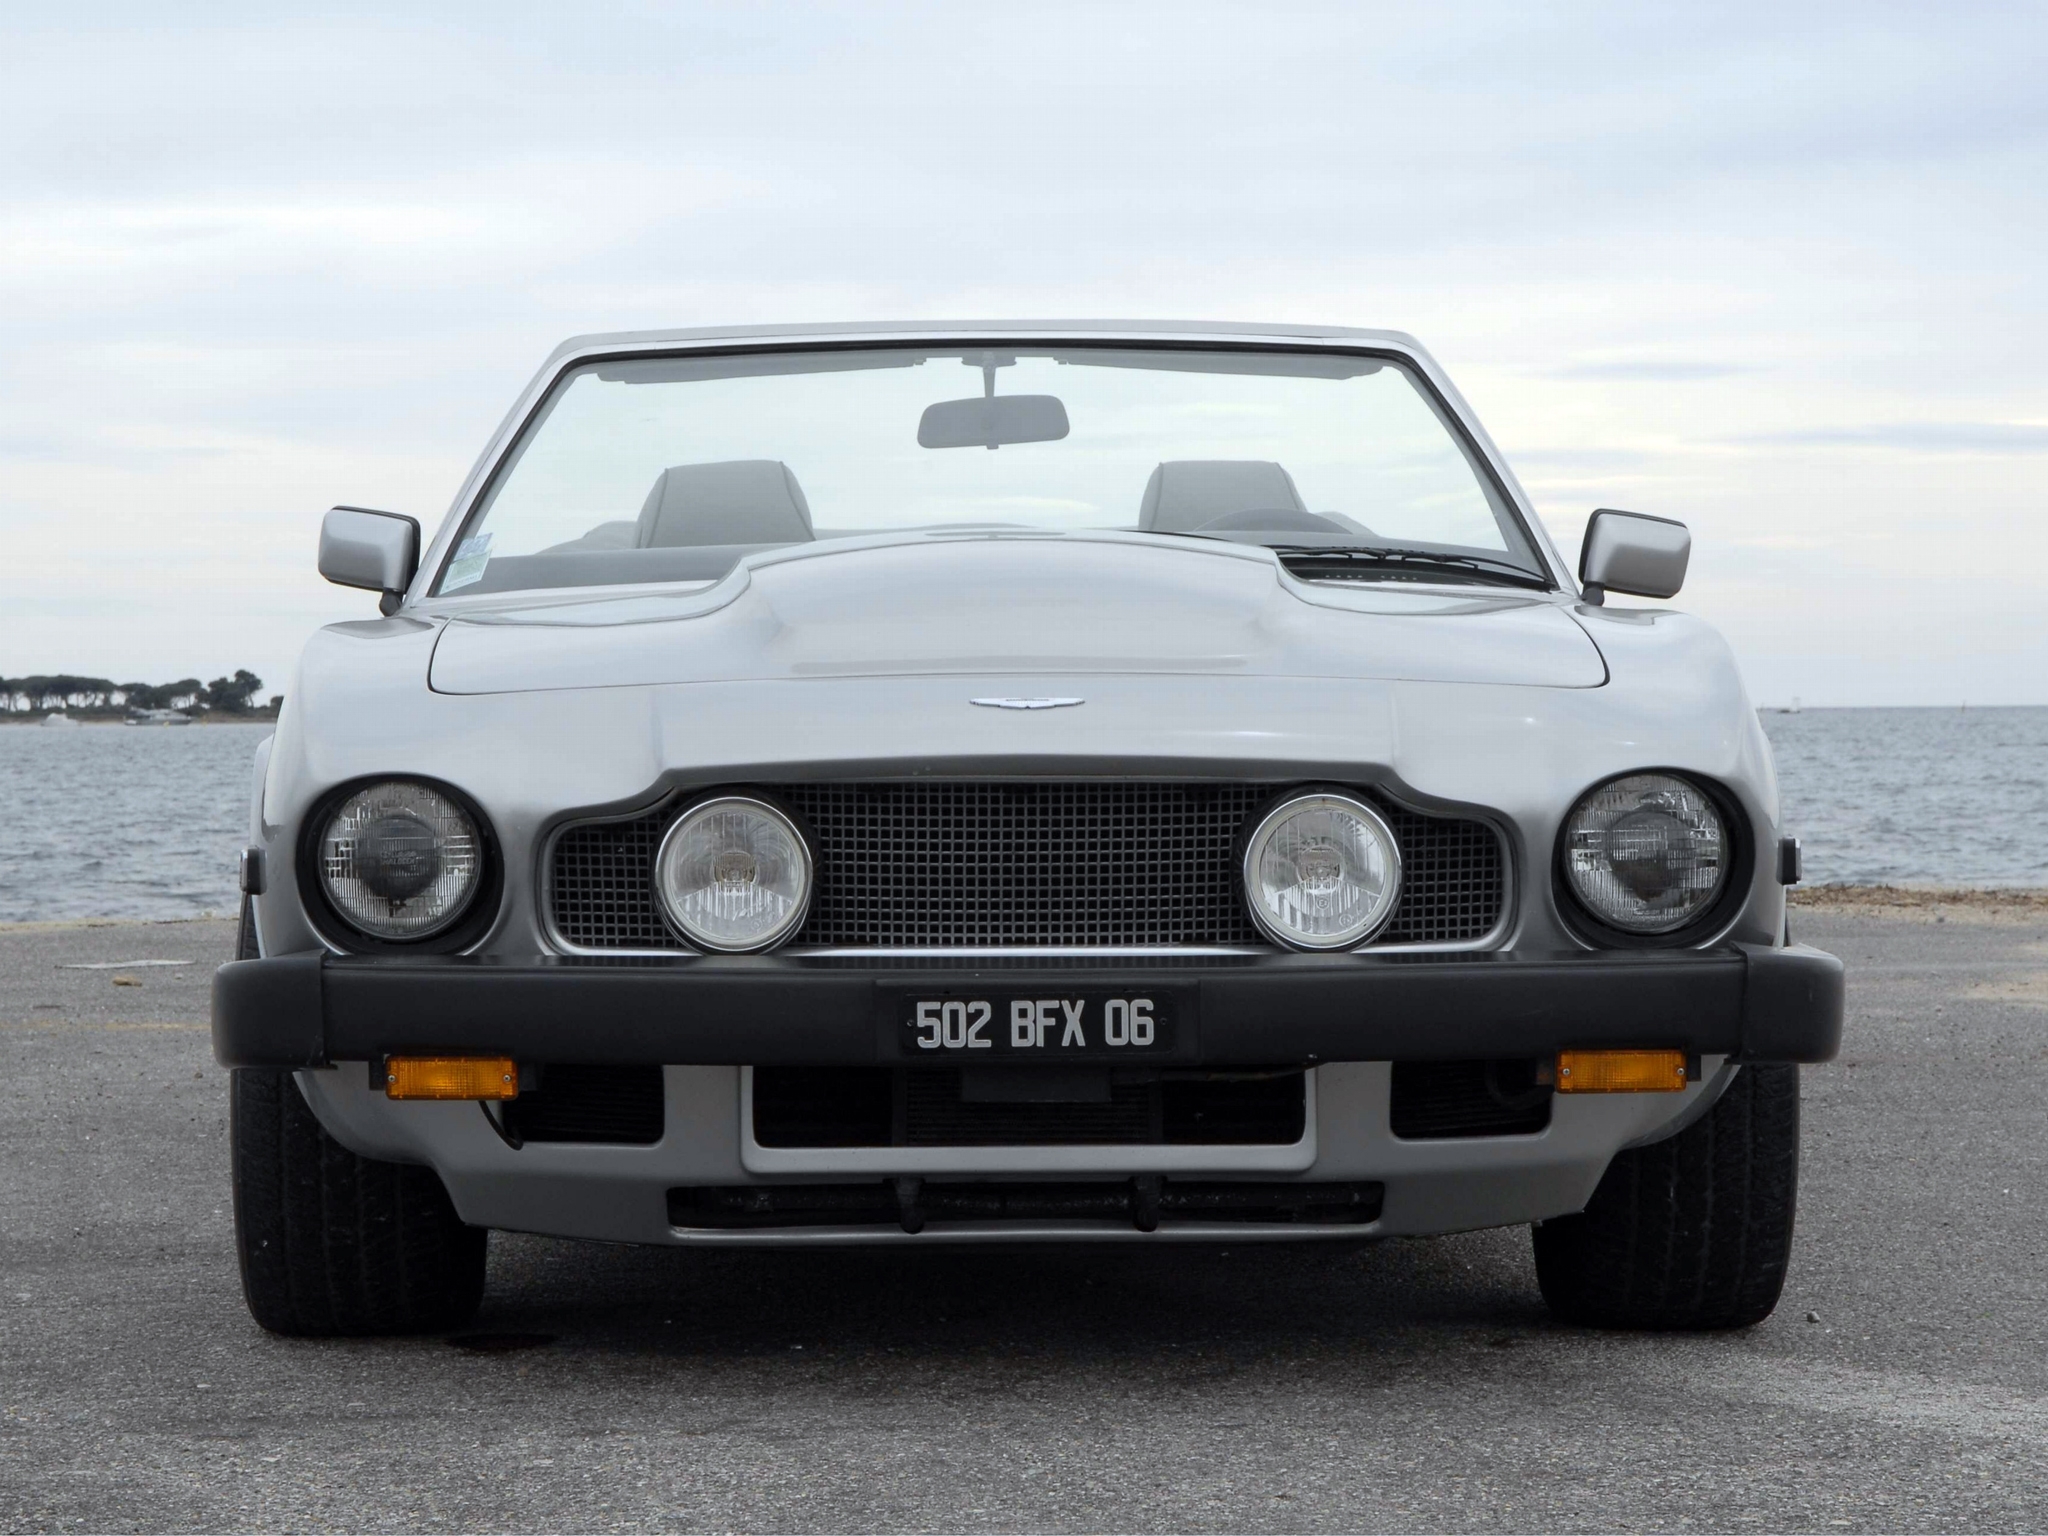 Phone Background Full HD 1977, aston martin, cars, cabriolet